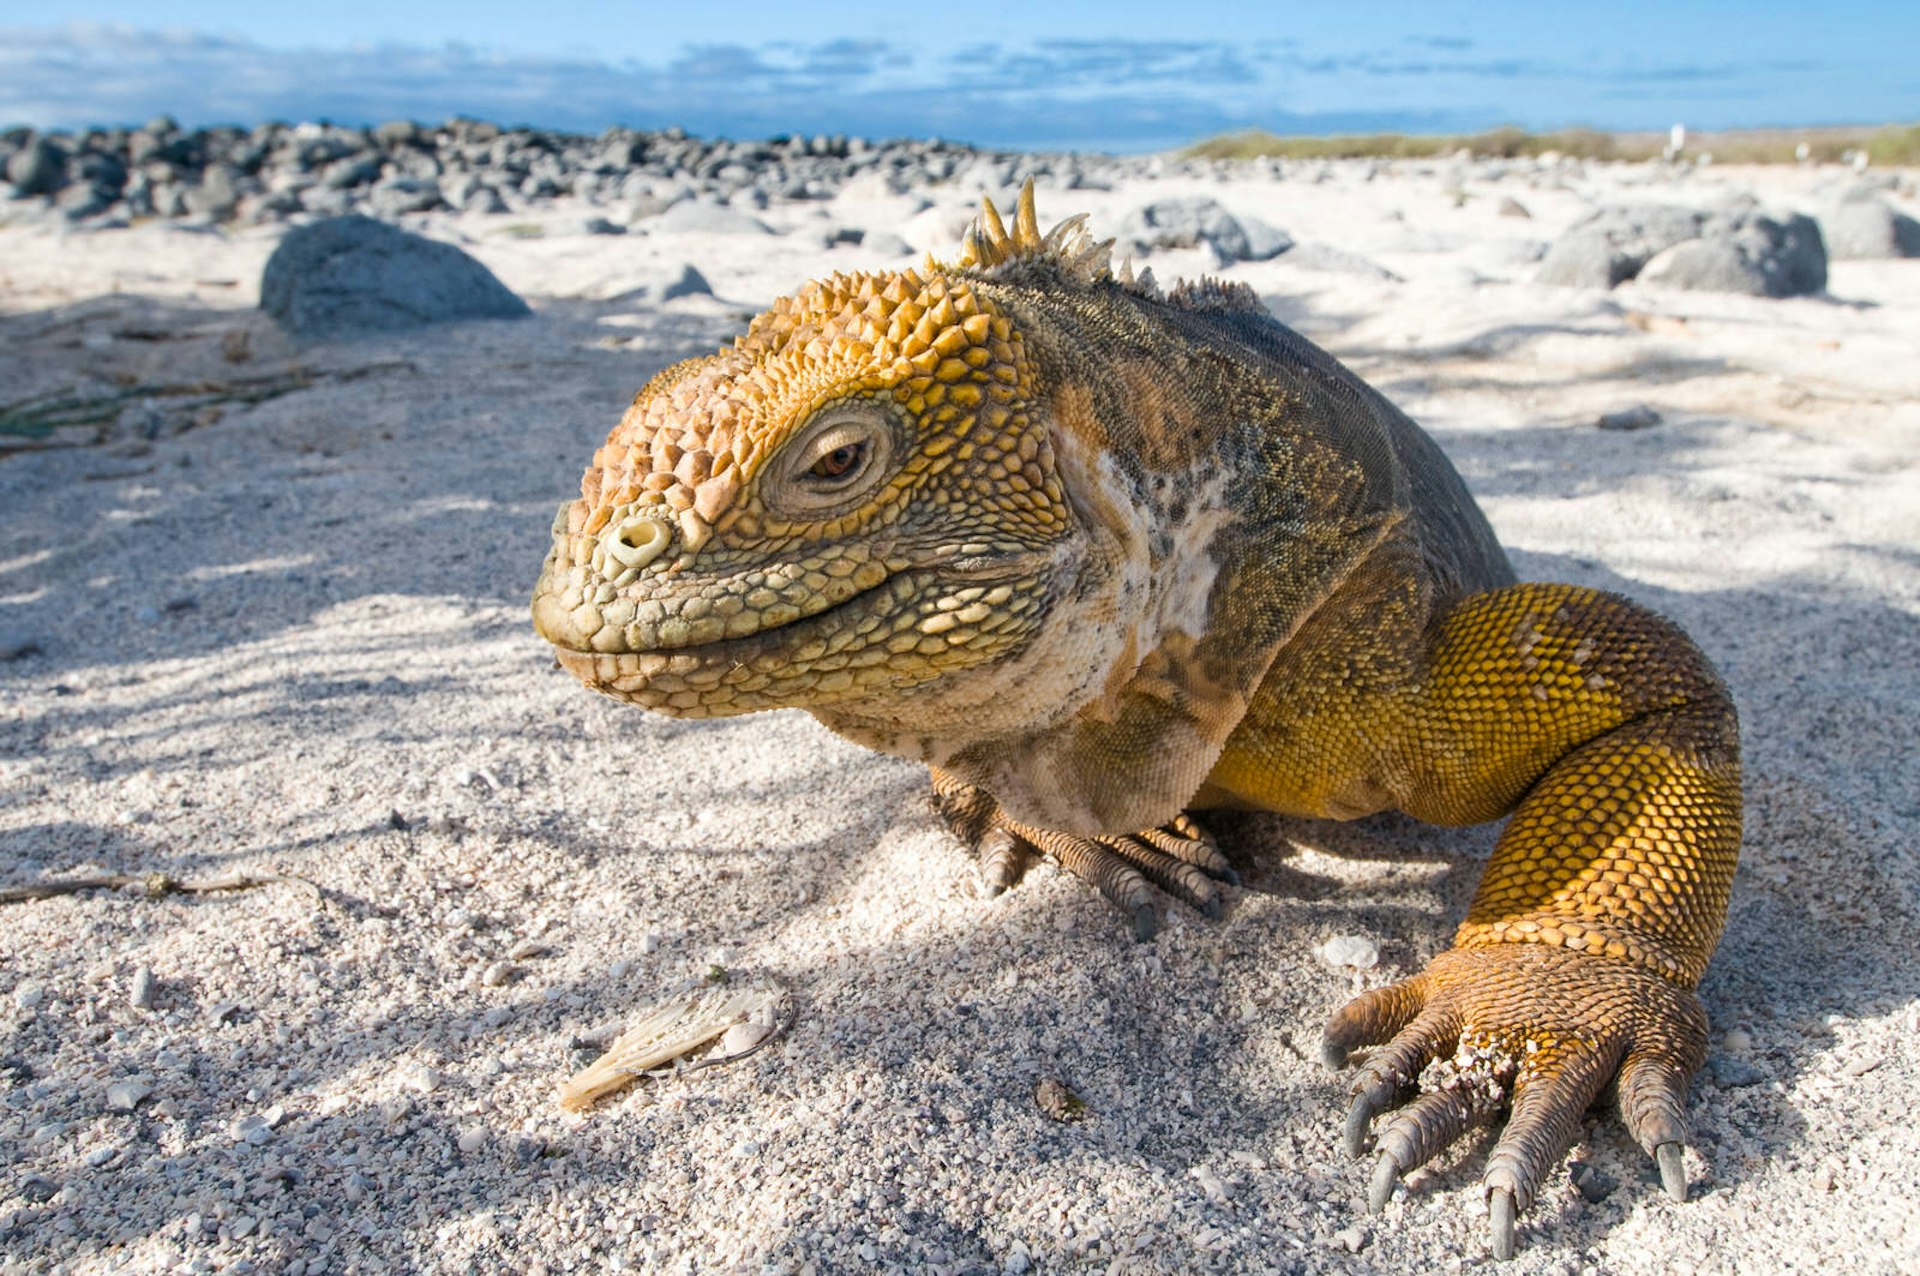 A close-up of an iguana on a beach in the Galapagos Islands © Alexander Safonov / Getty Images